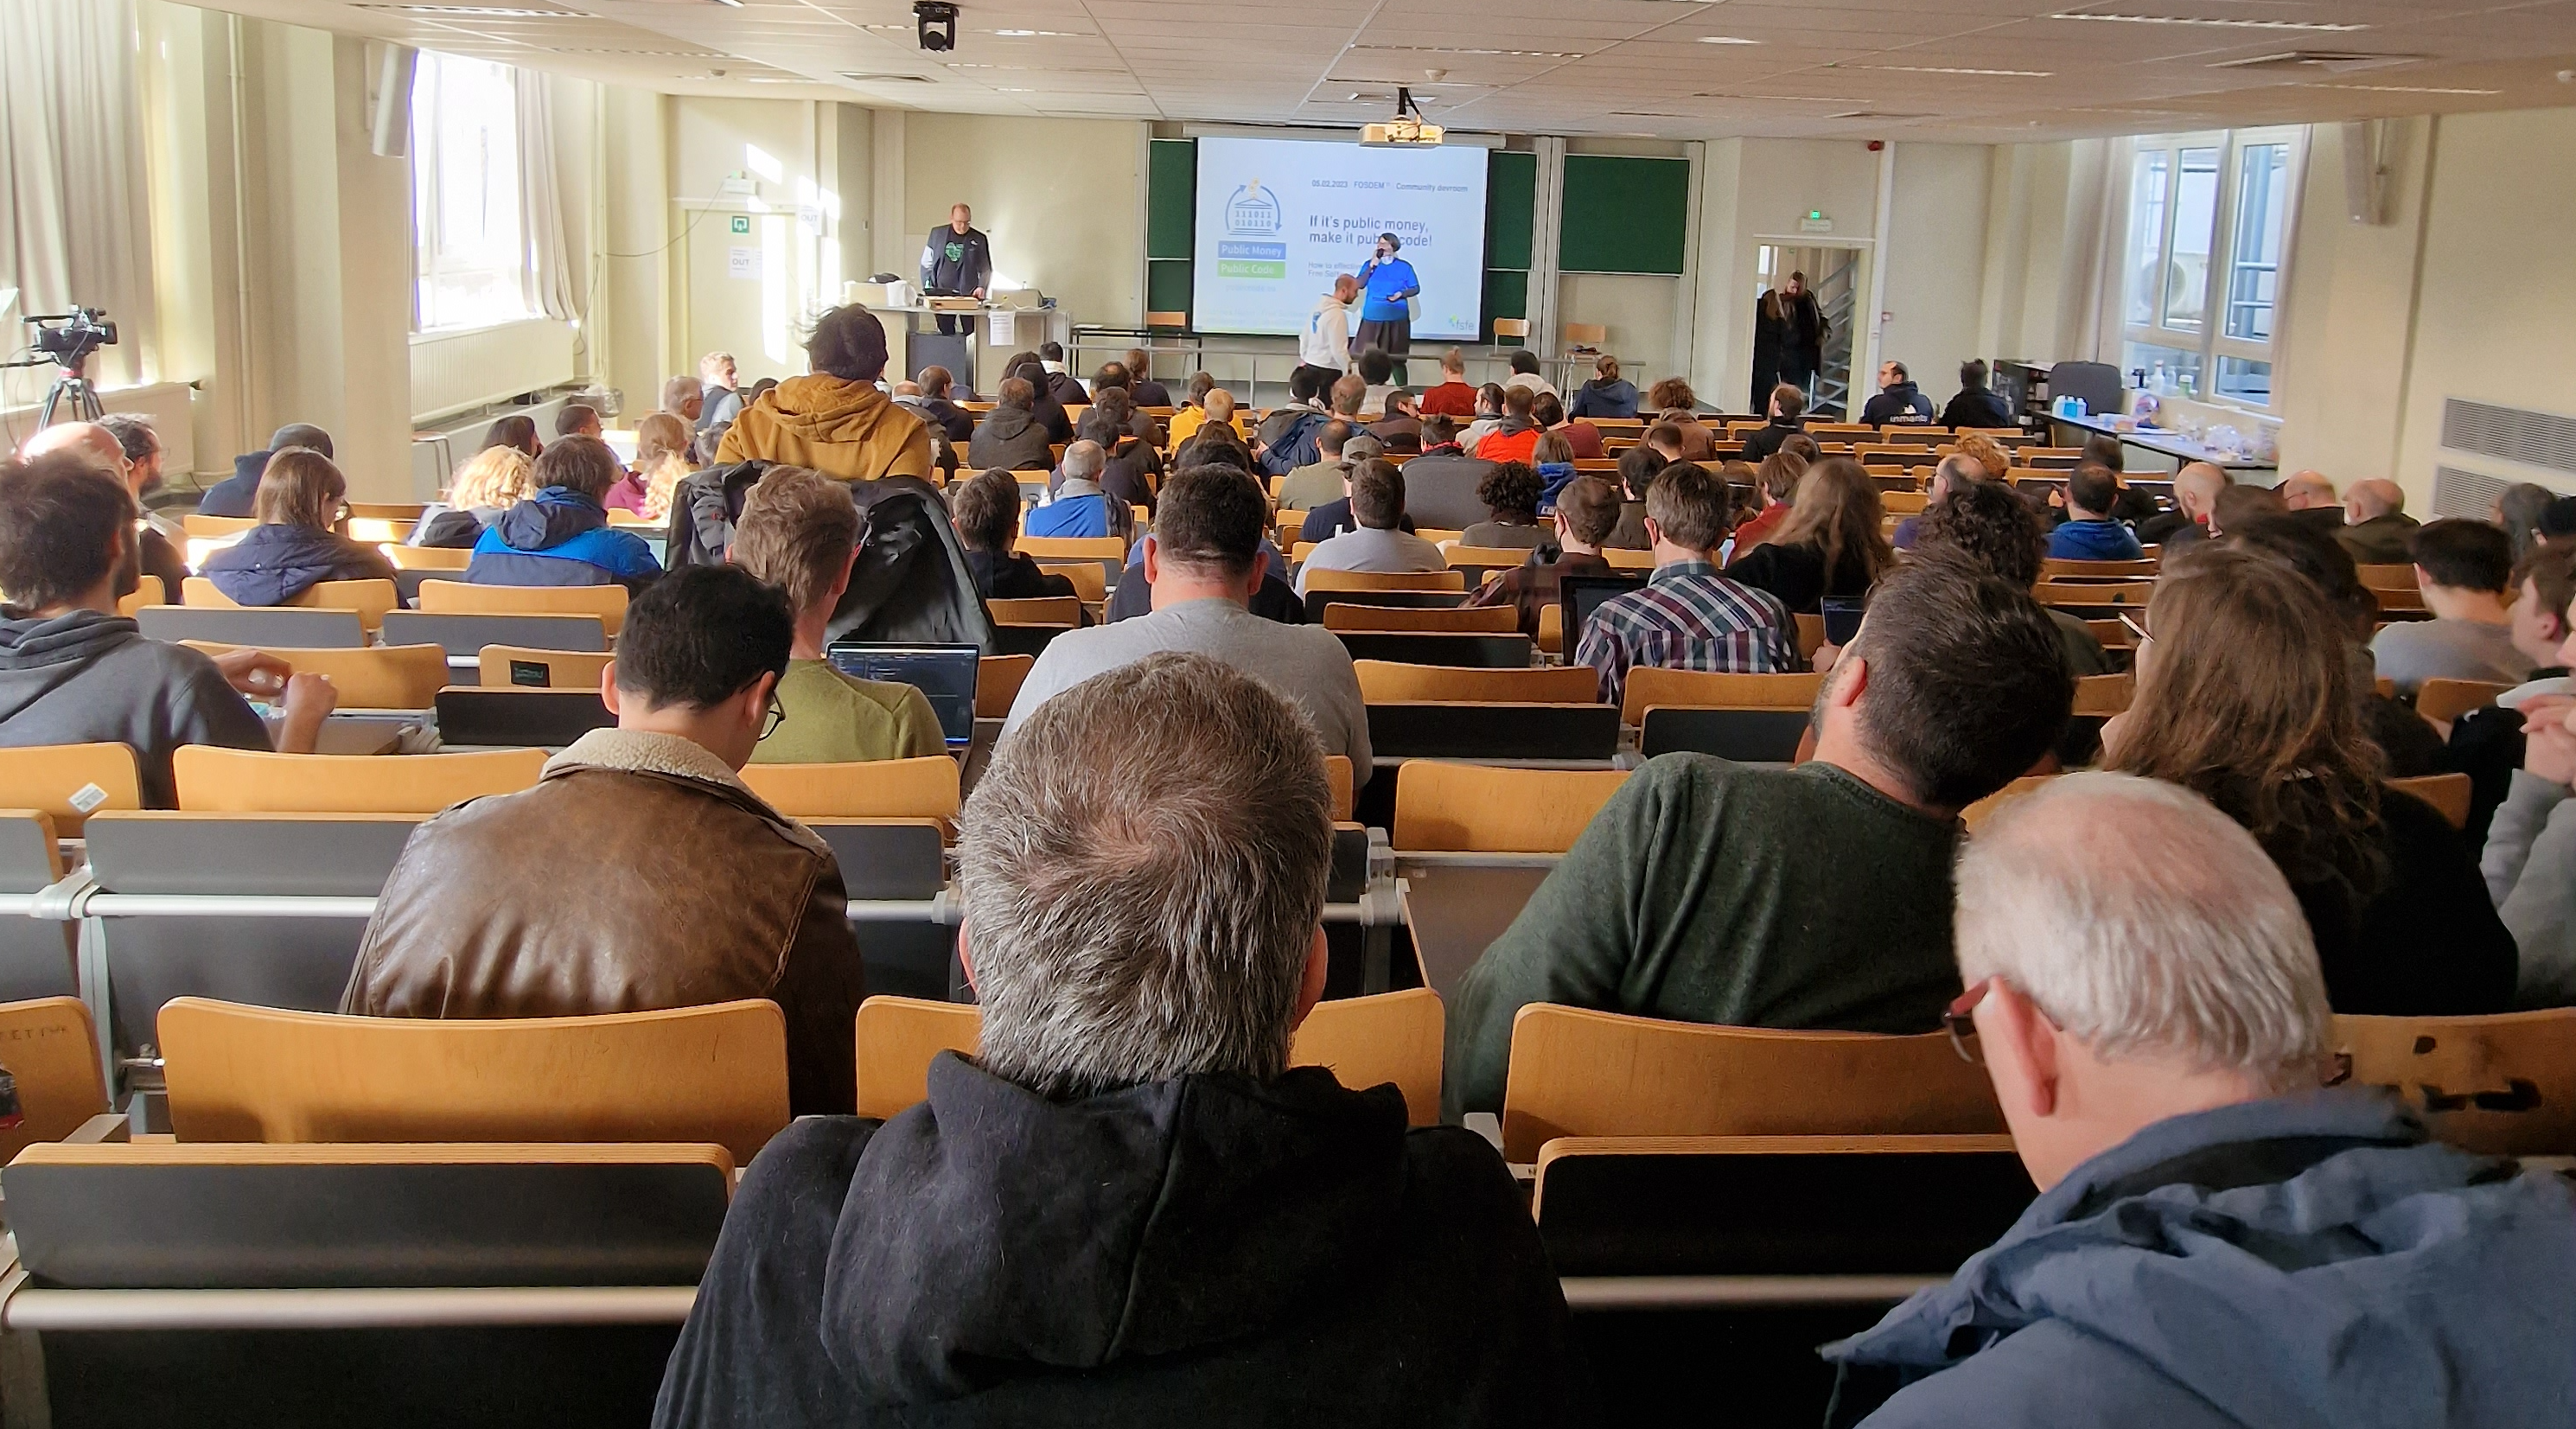 Photo from the back of the FOSDEM community devroom